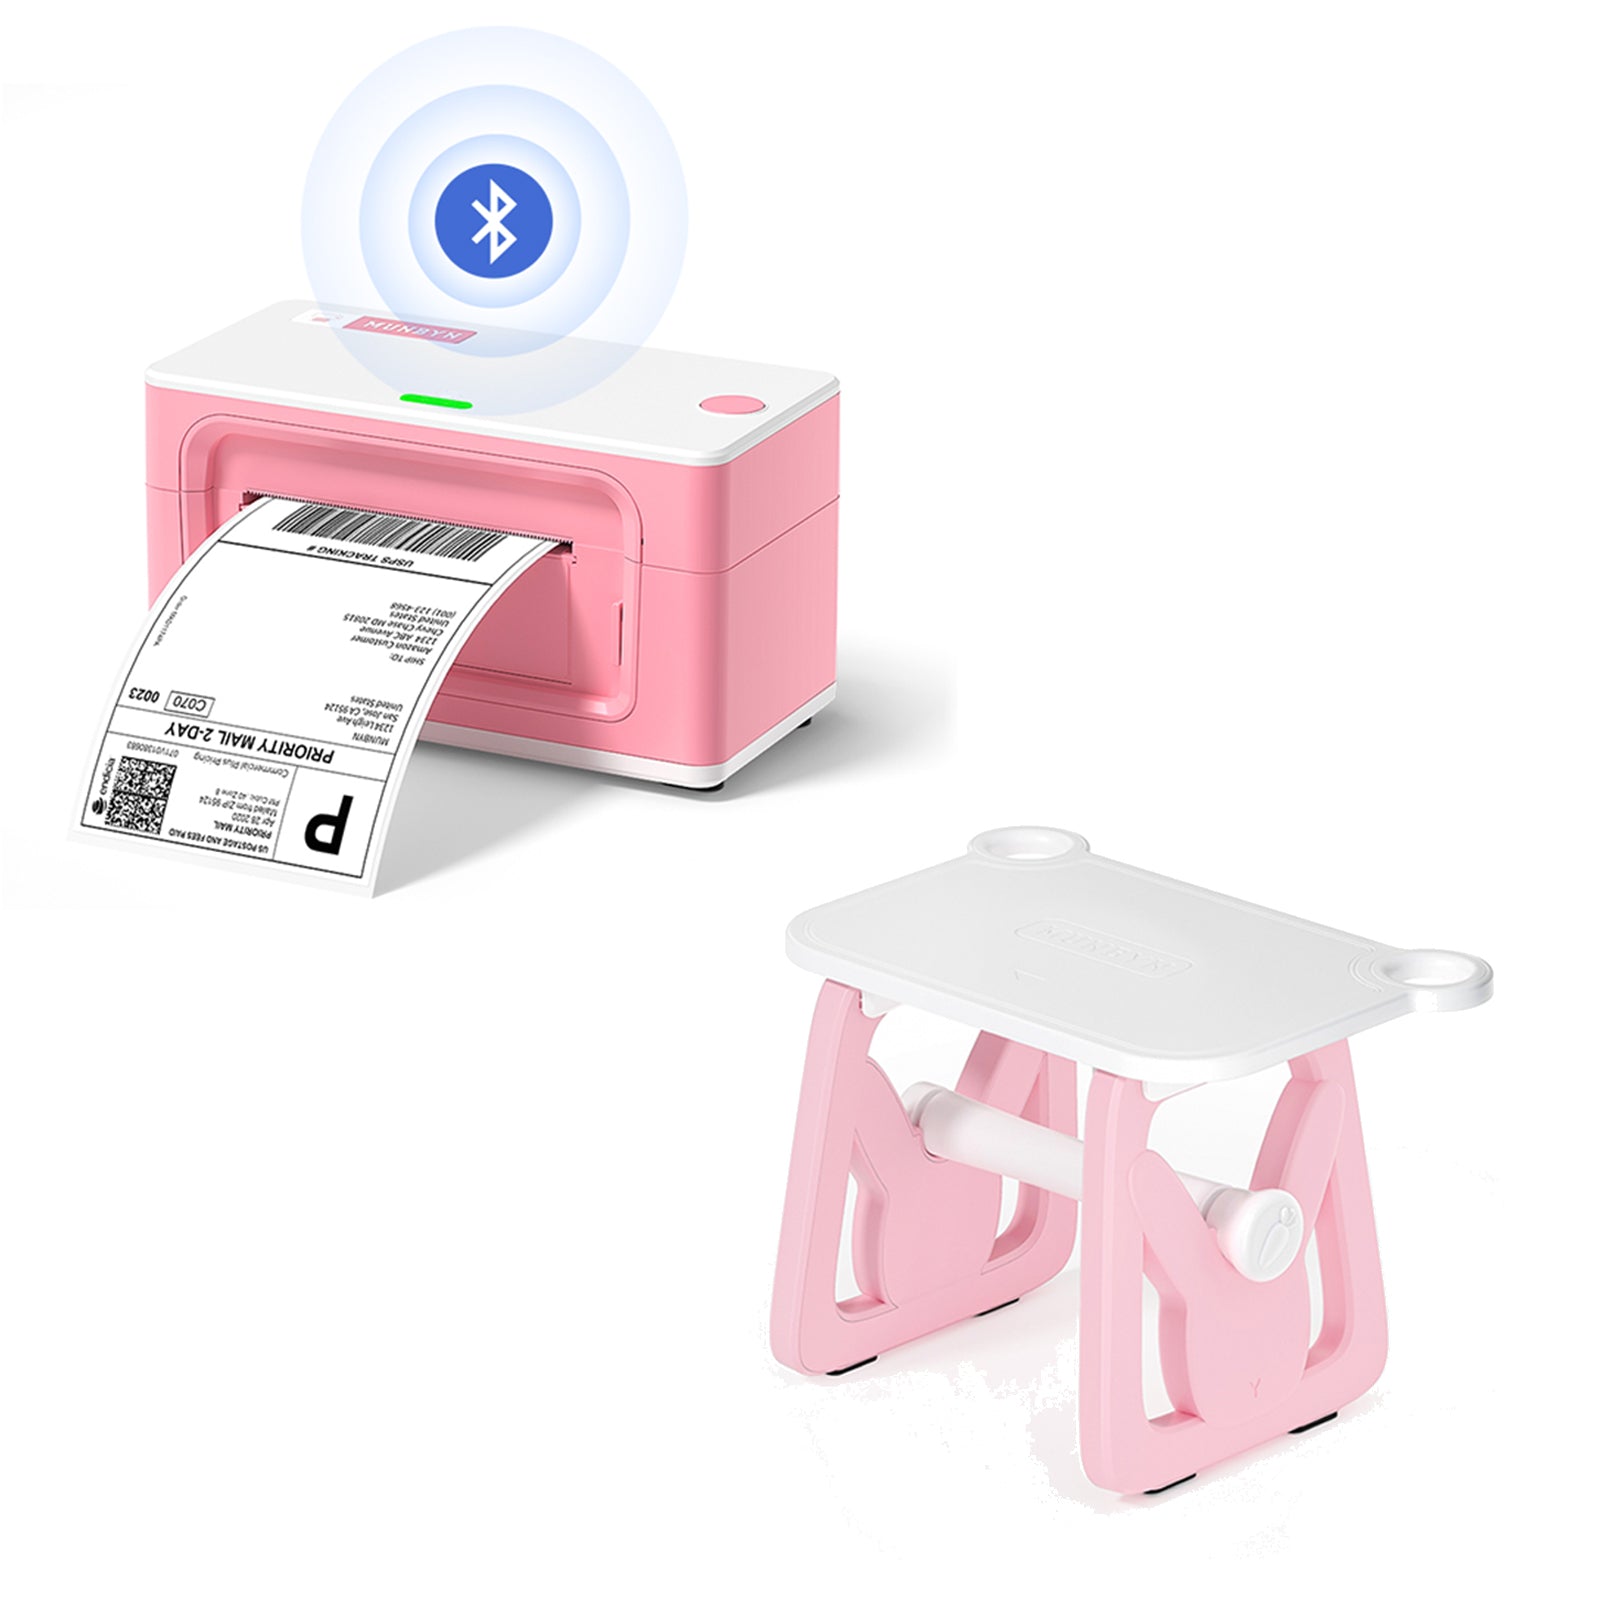 The bundle includes a Bluetooth thermal printer along with a multifunctional MUNBYN pink label holder.